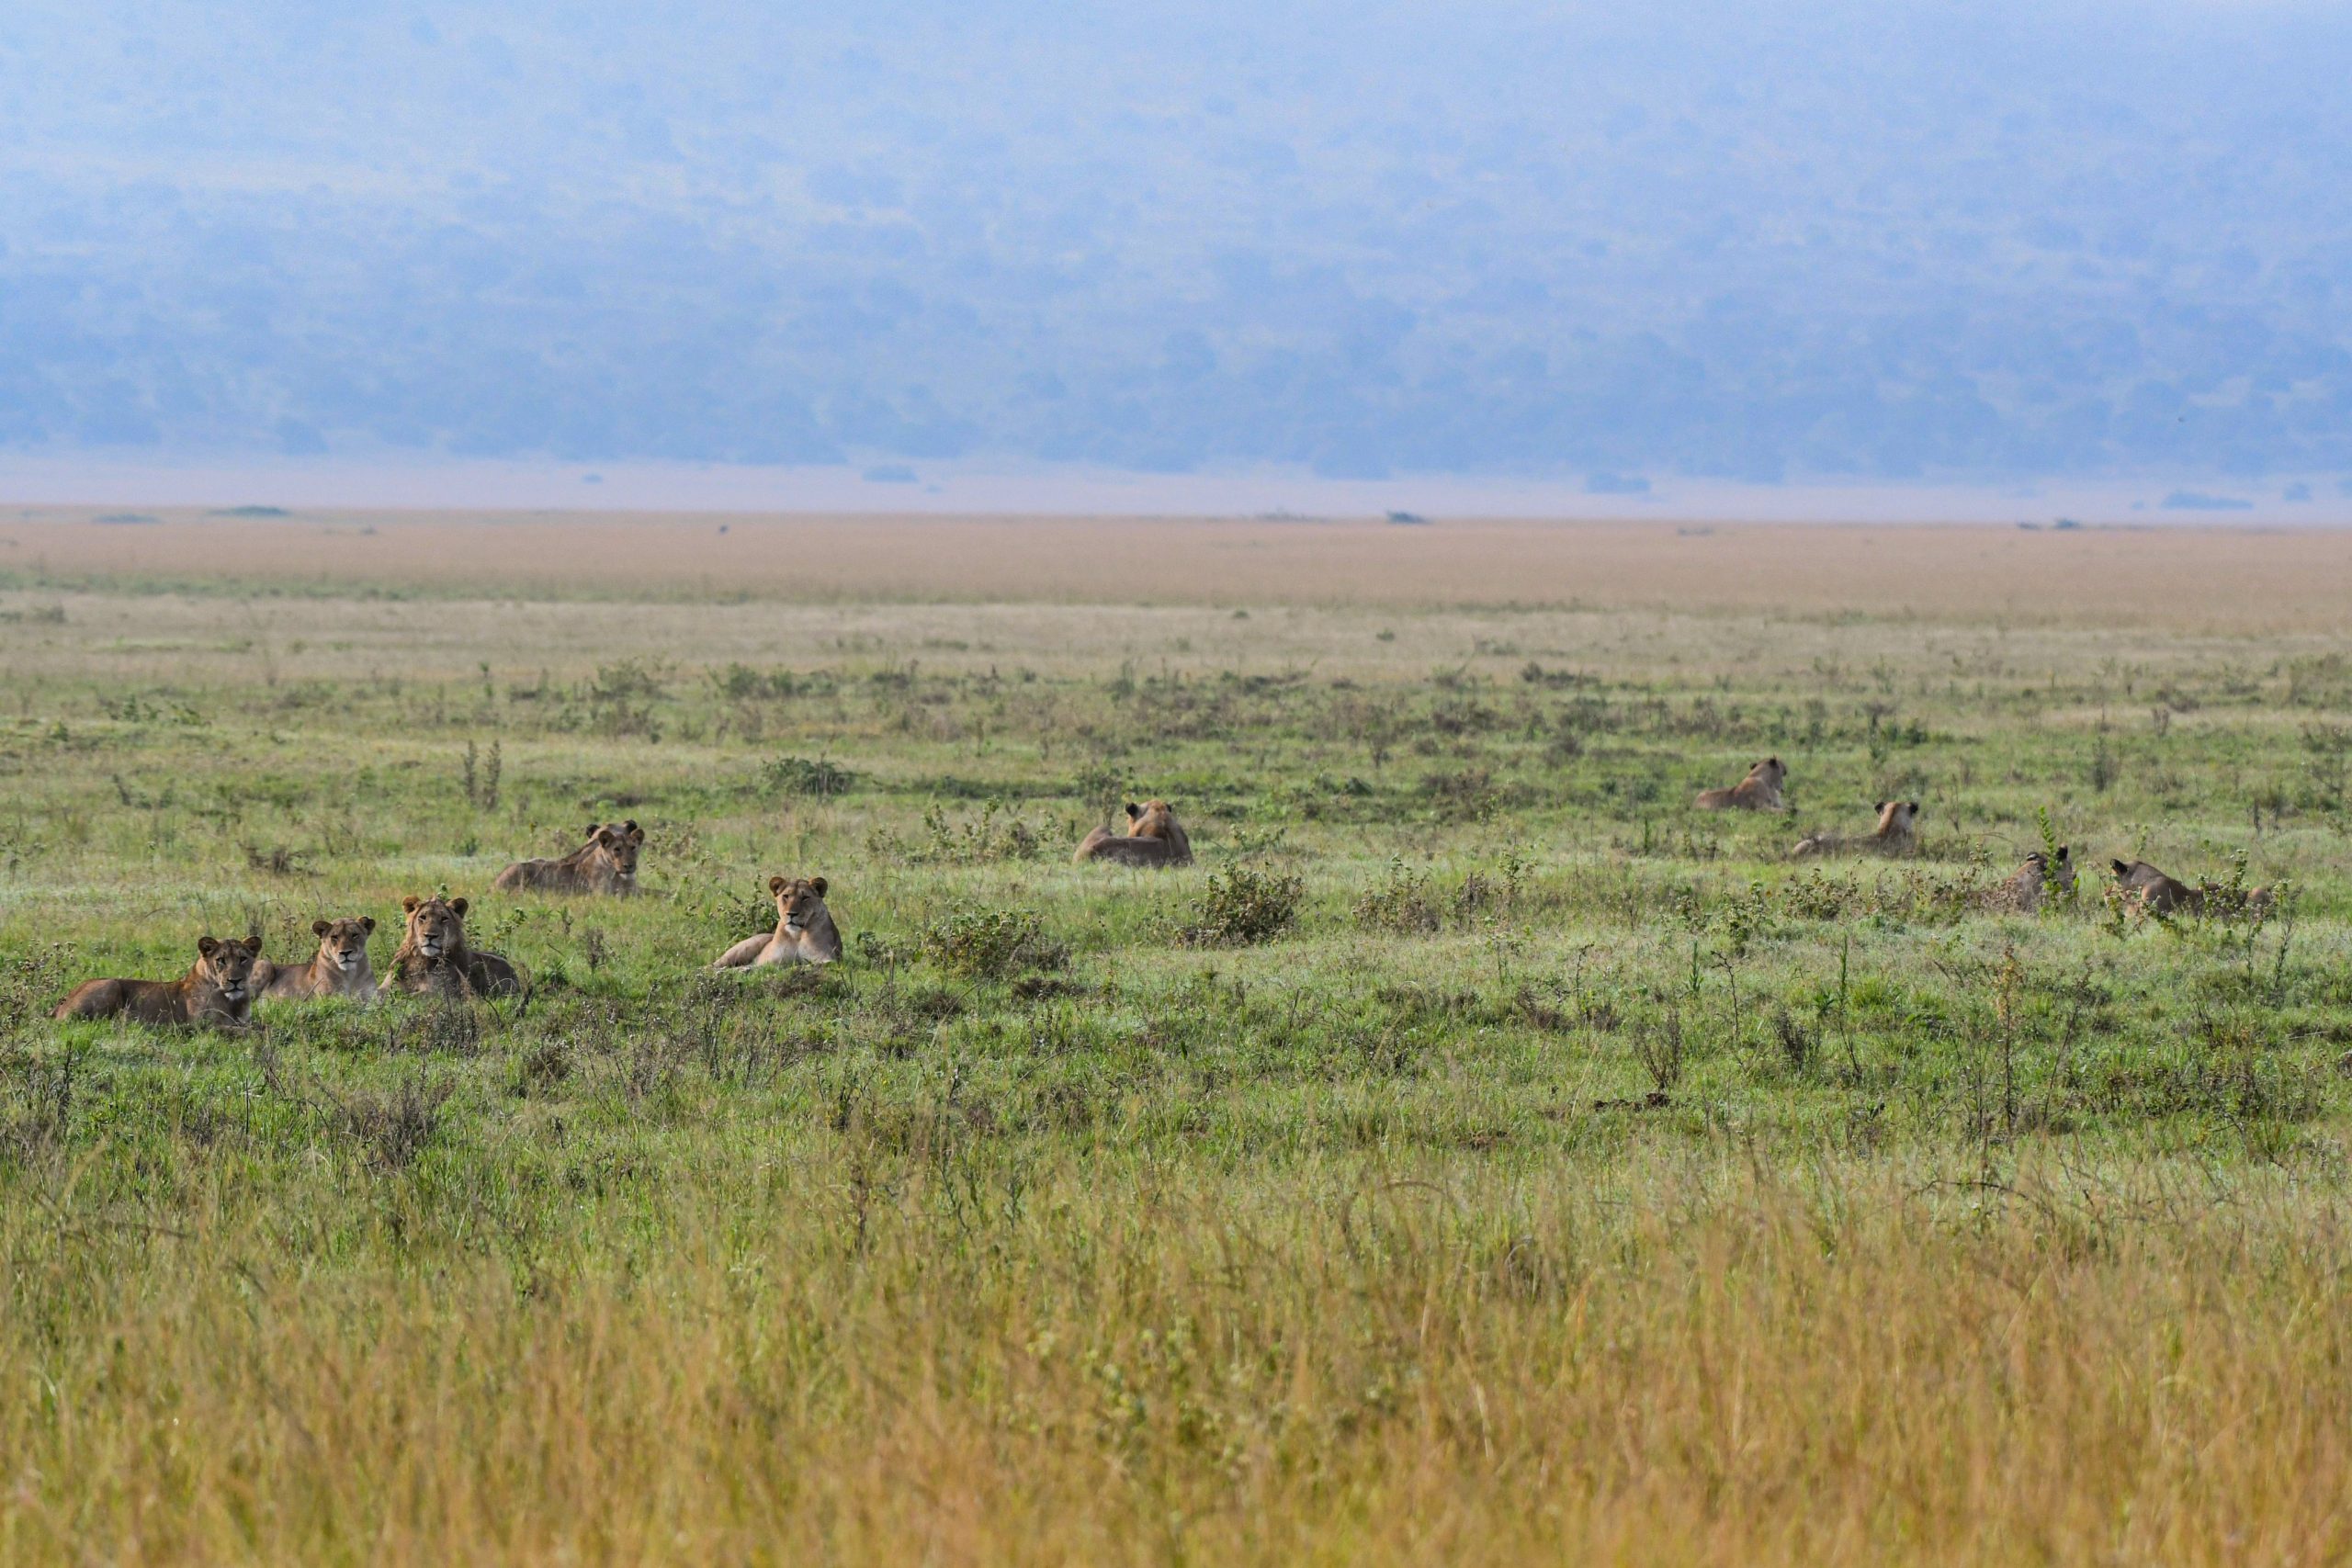 Facts About Lions In Akagera